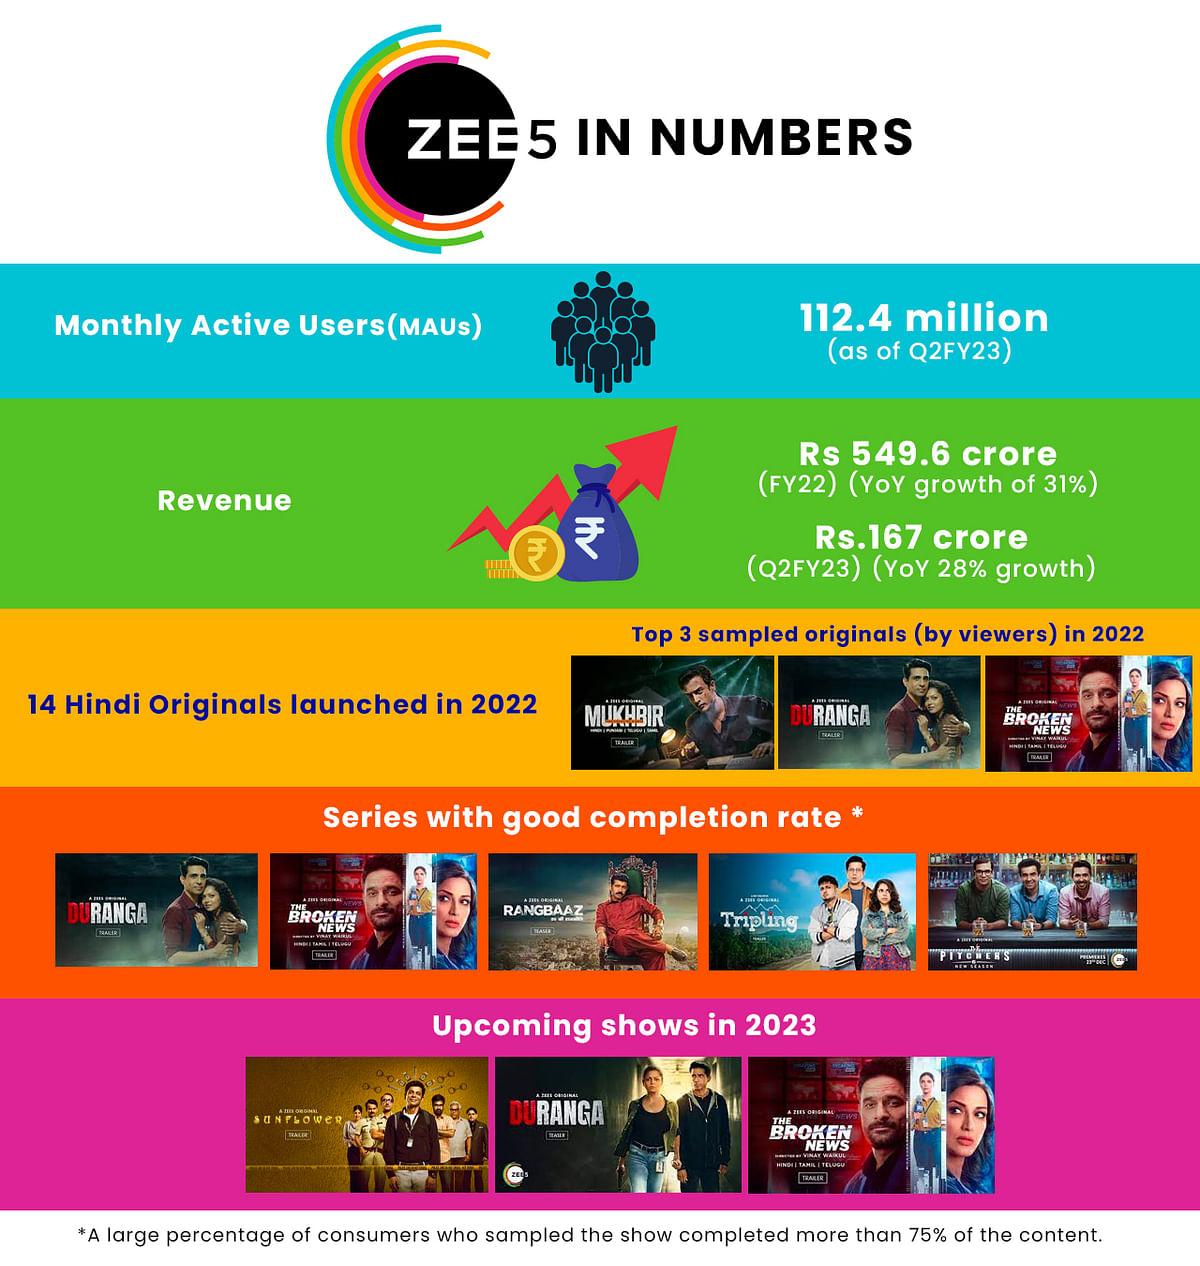 Zee5 skips the stars and goes instead for “authentic storytelling”